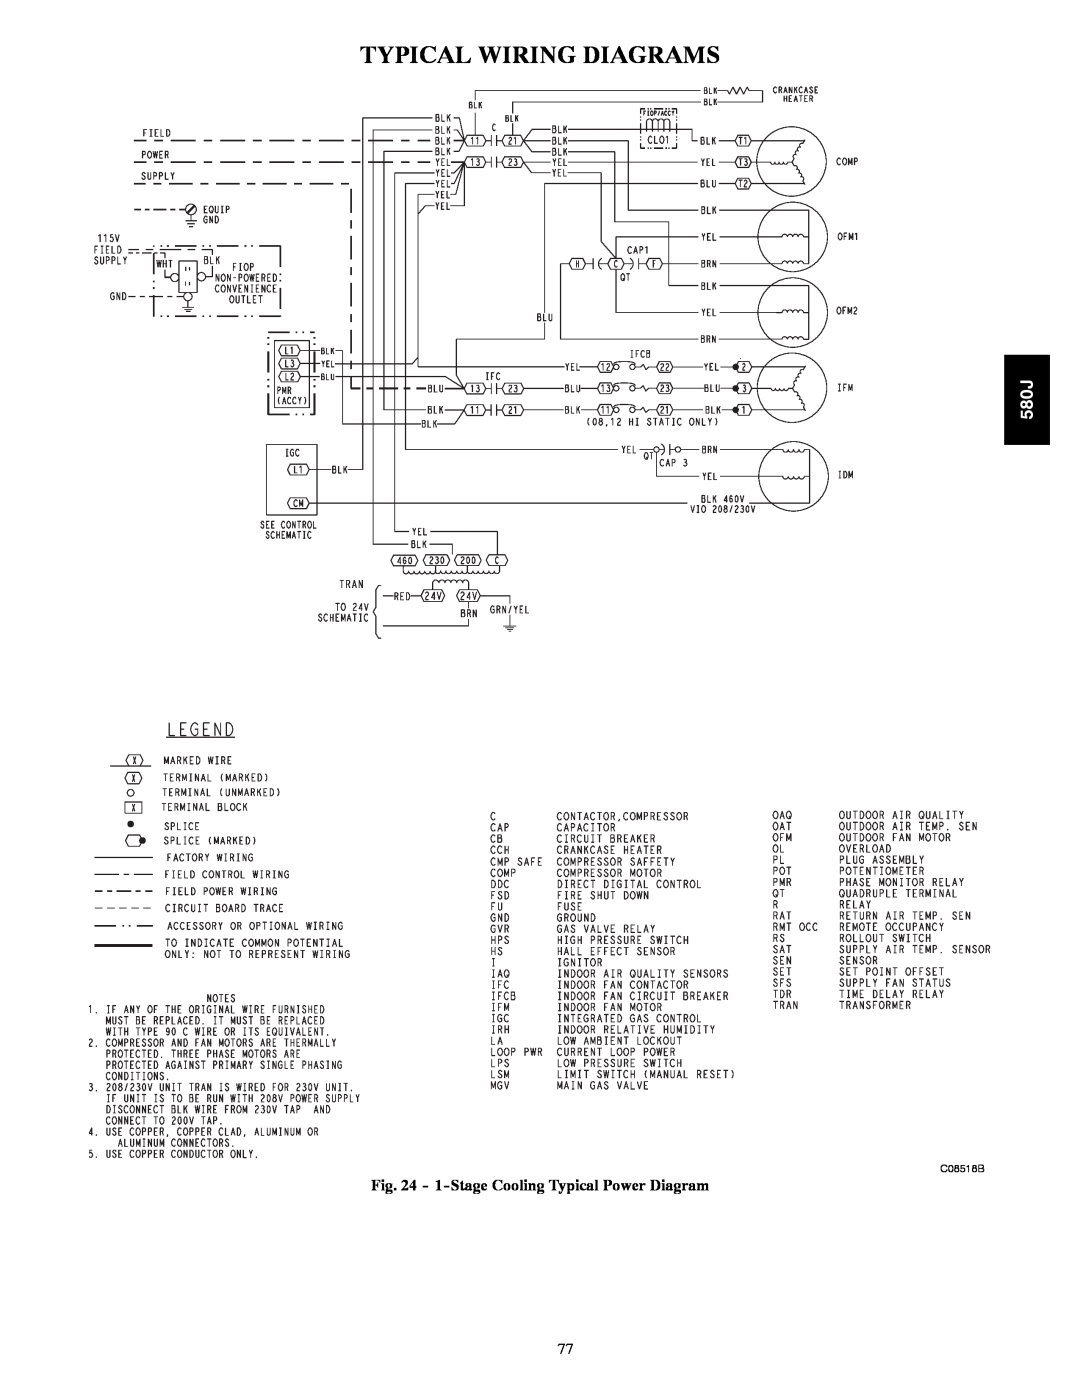 Bryant 580J manual Typical Wiring Diagrams, 1-StageCooling Typical Power Diagram 